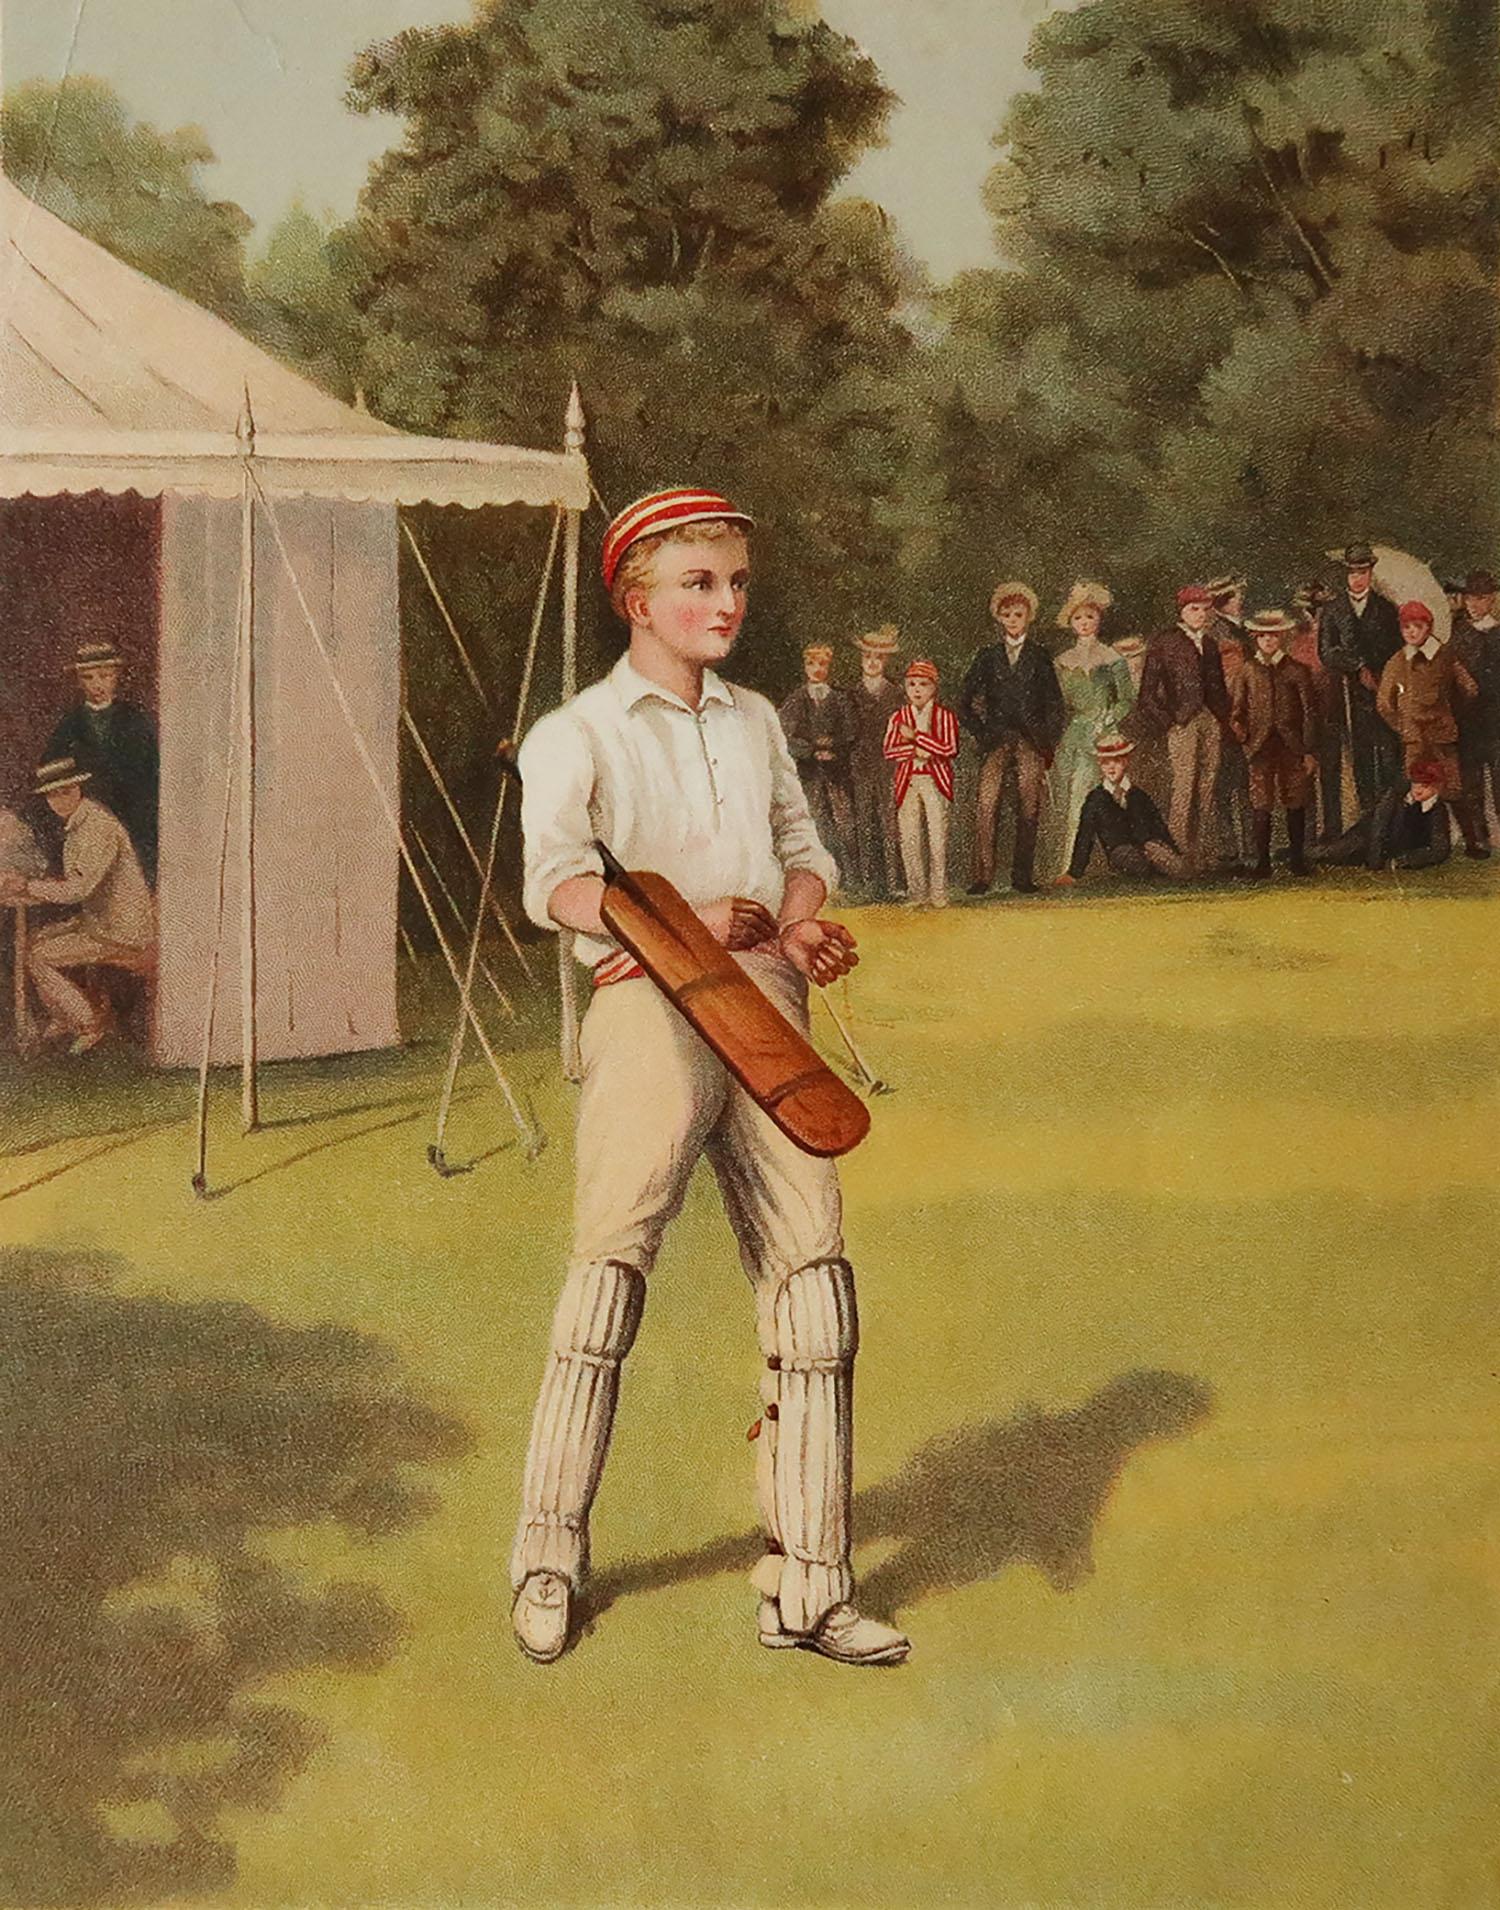 Great image of a young cricketer

Chromo-lithograph

Original colour

Published C.1900

Unframed.